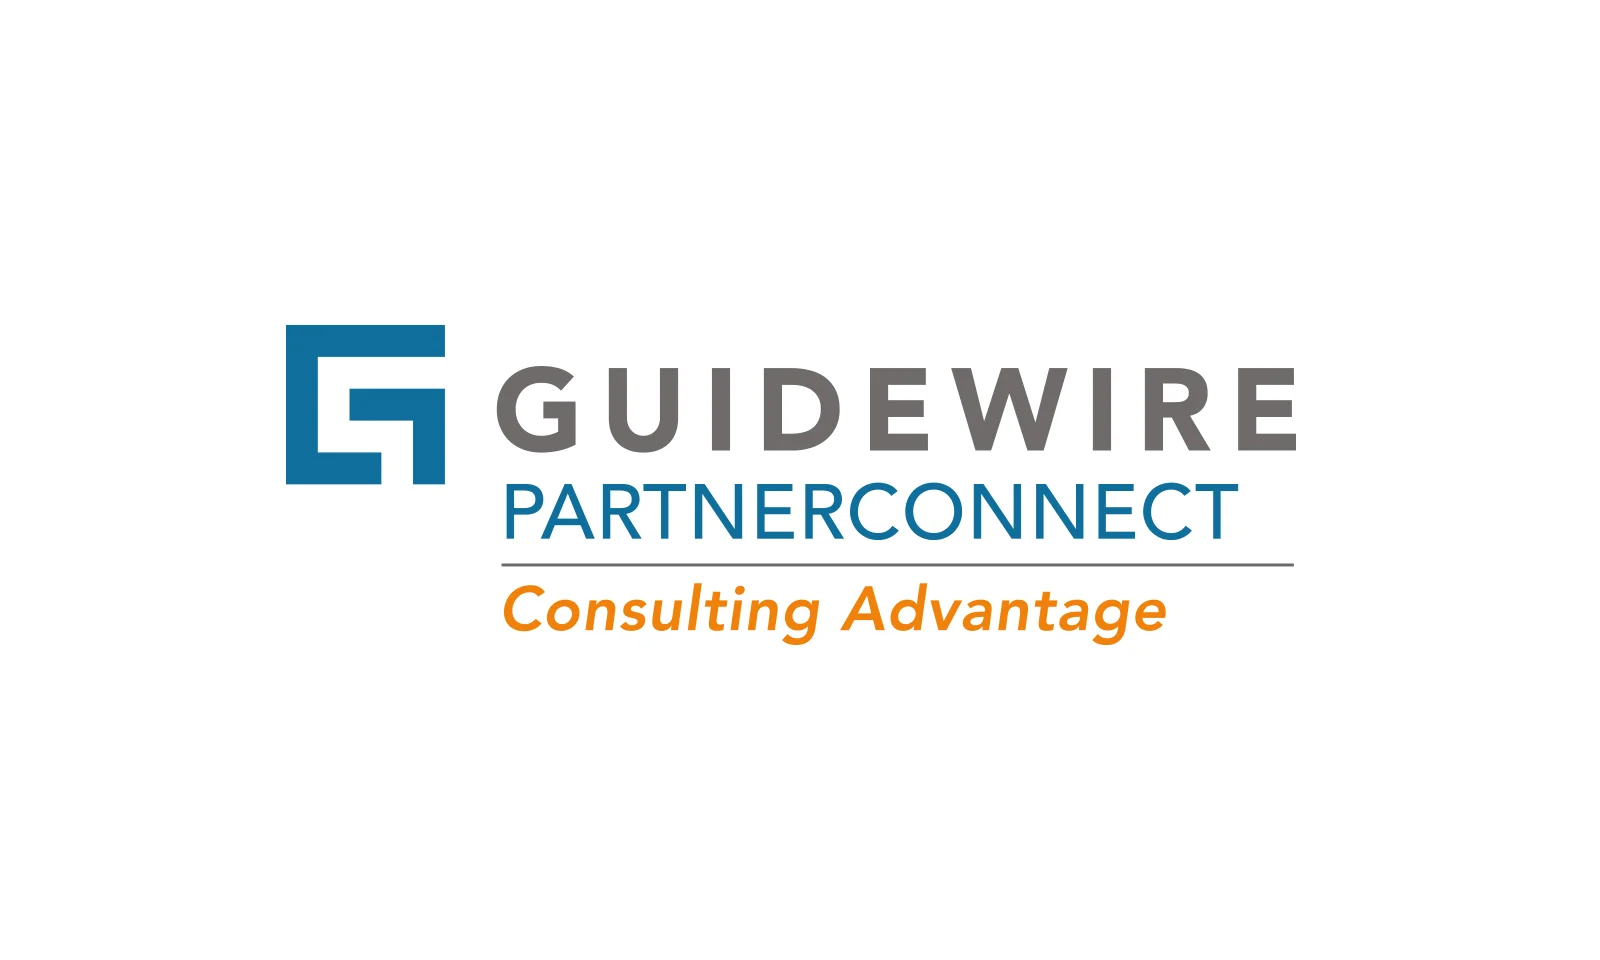 Explore the Guidewire PartnerConnect Consulting Advantage Badge, showcasing the prestigious partnership and expertise in delivering top-tier consulting services. Learn more about how this badge signifies excellence in consulting and collaboration with Guidewire. Discover the benefits and insights of being a Guidewire PartnerConnect Consulting Advantage member.